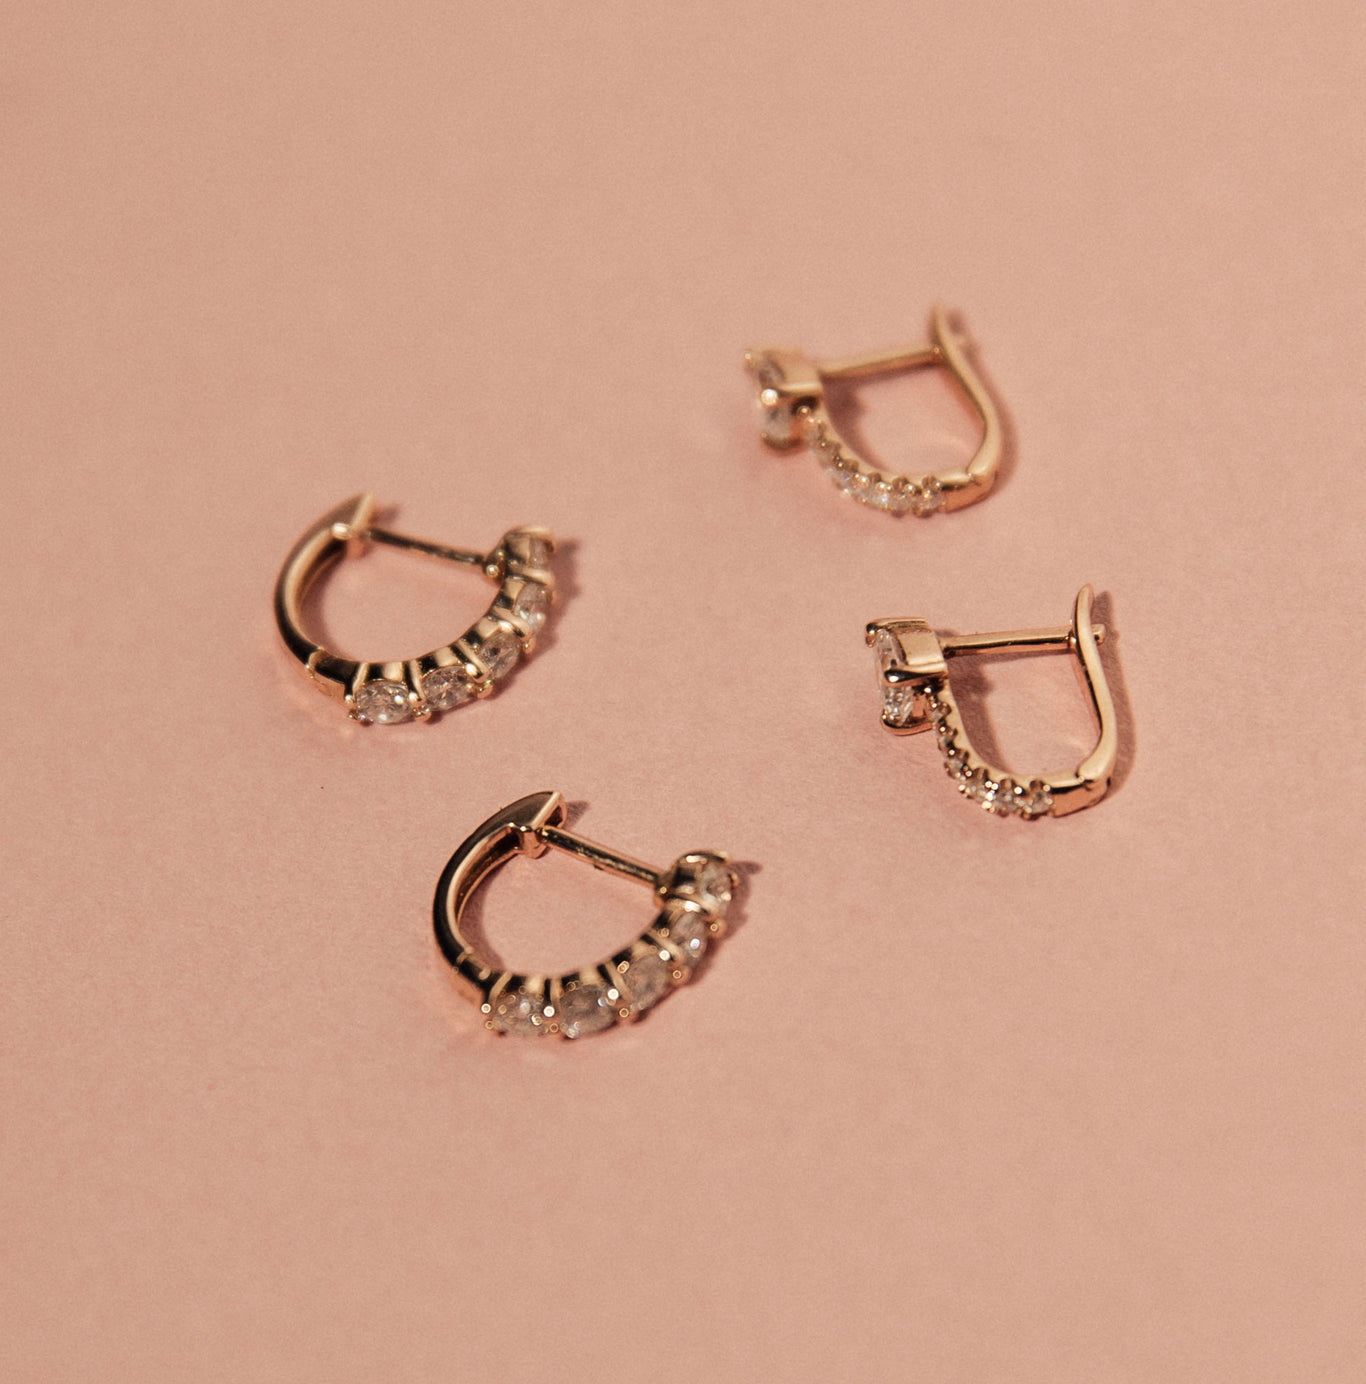 The Sparkler Huggies and Serpent Huggies shown in rose gold. The perfect stackable earrings!